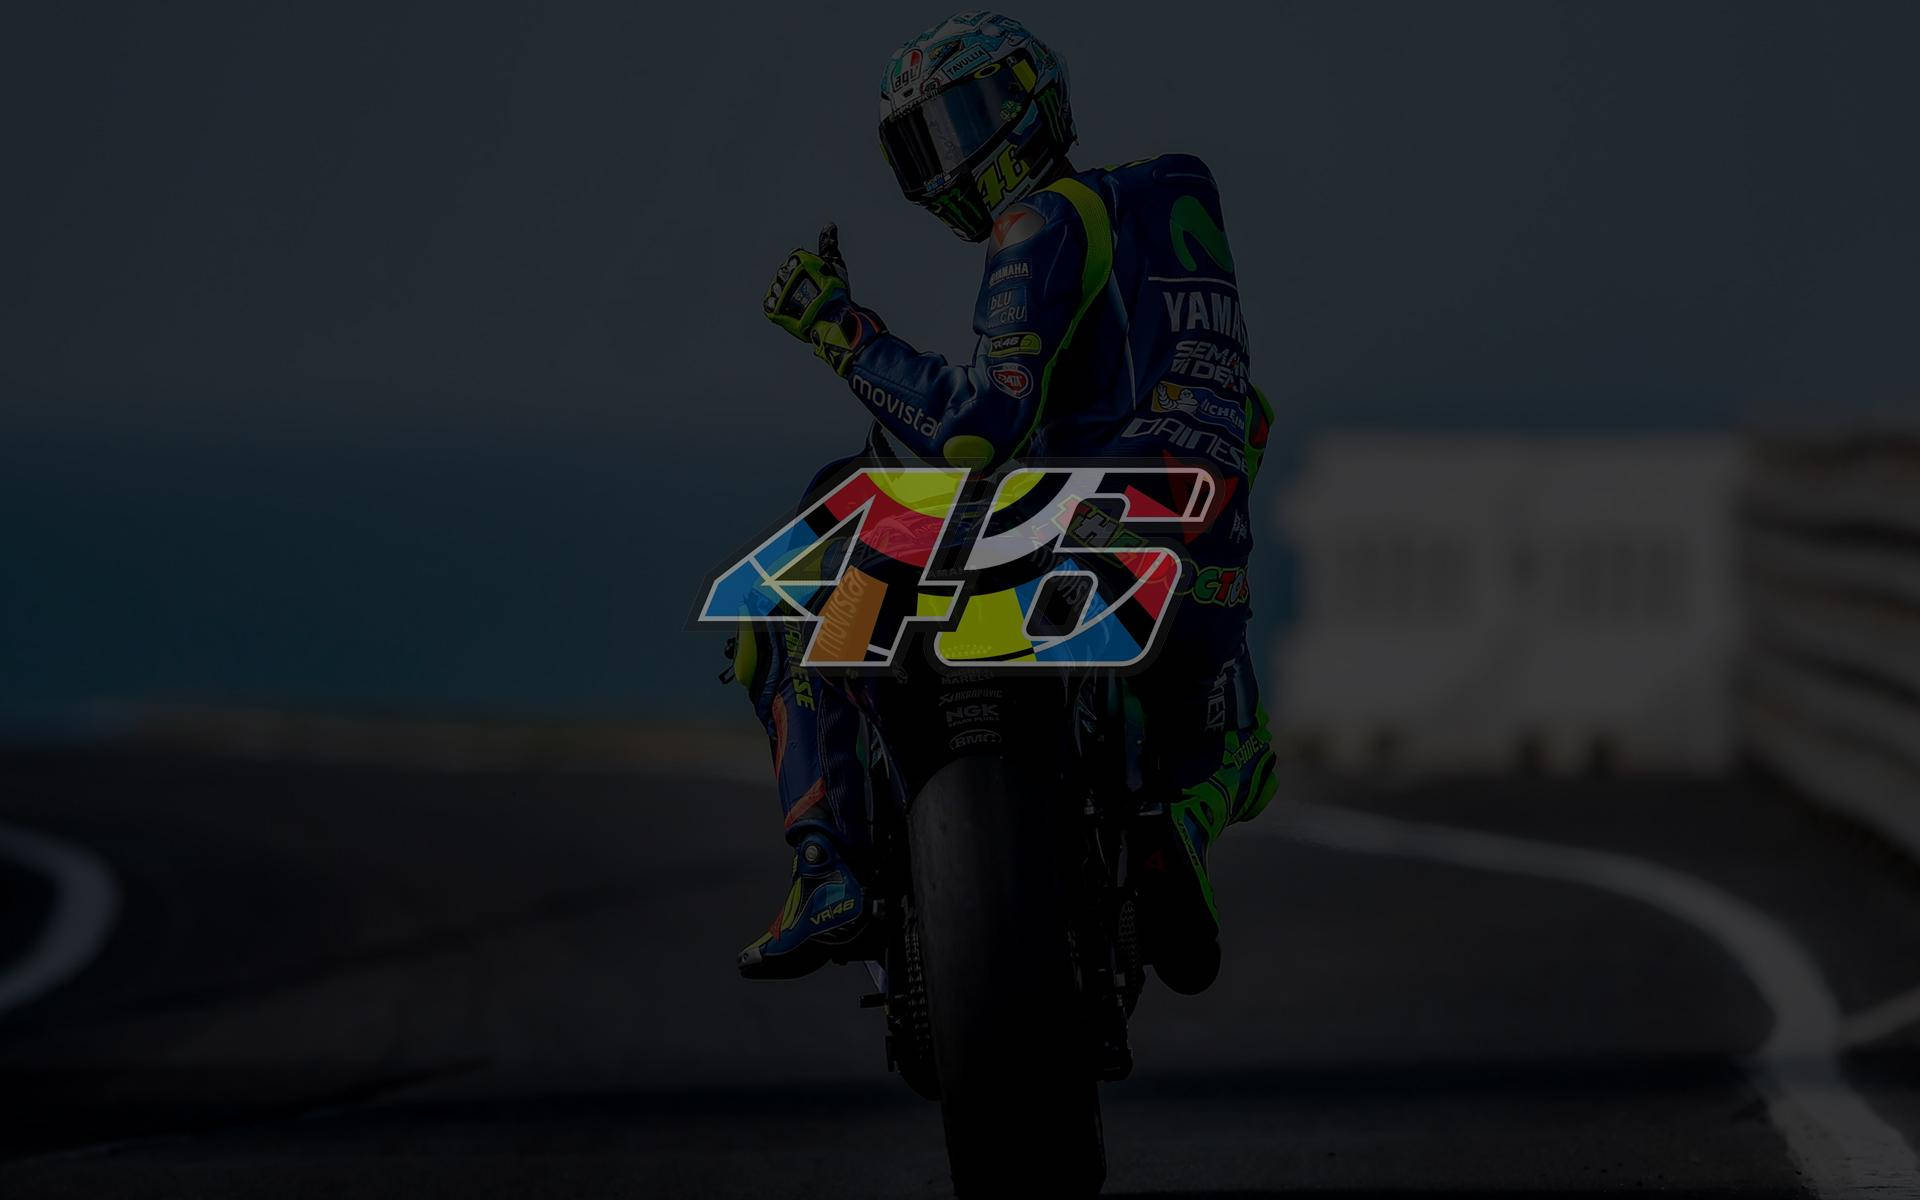 Top 999+ Valentino Rossi Wallpaper Full HD, 4K Free to Use